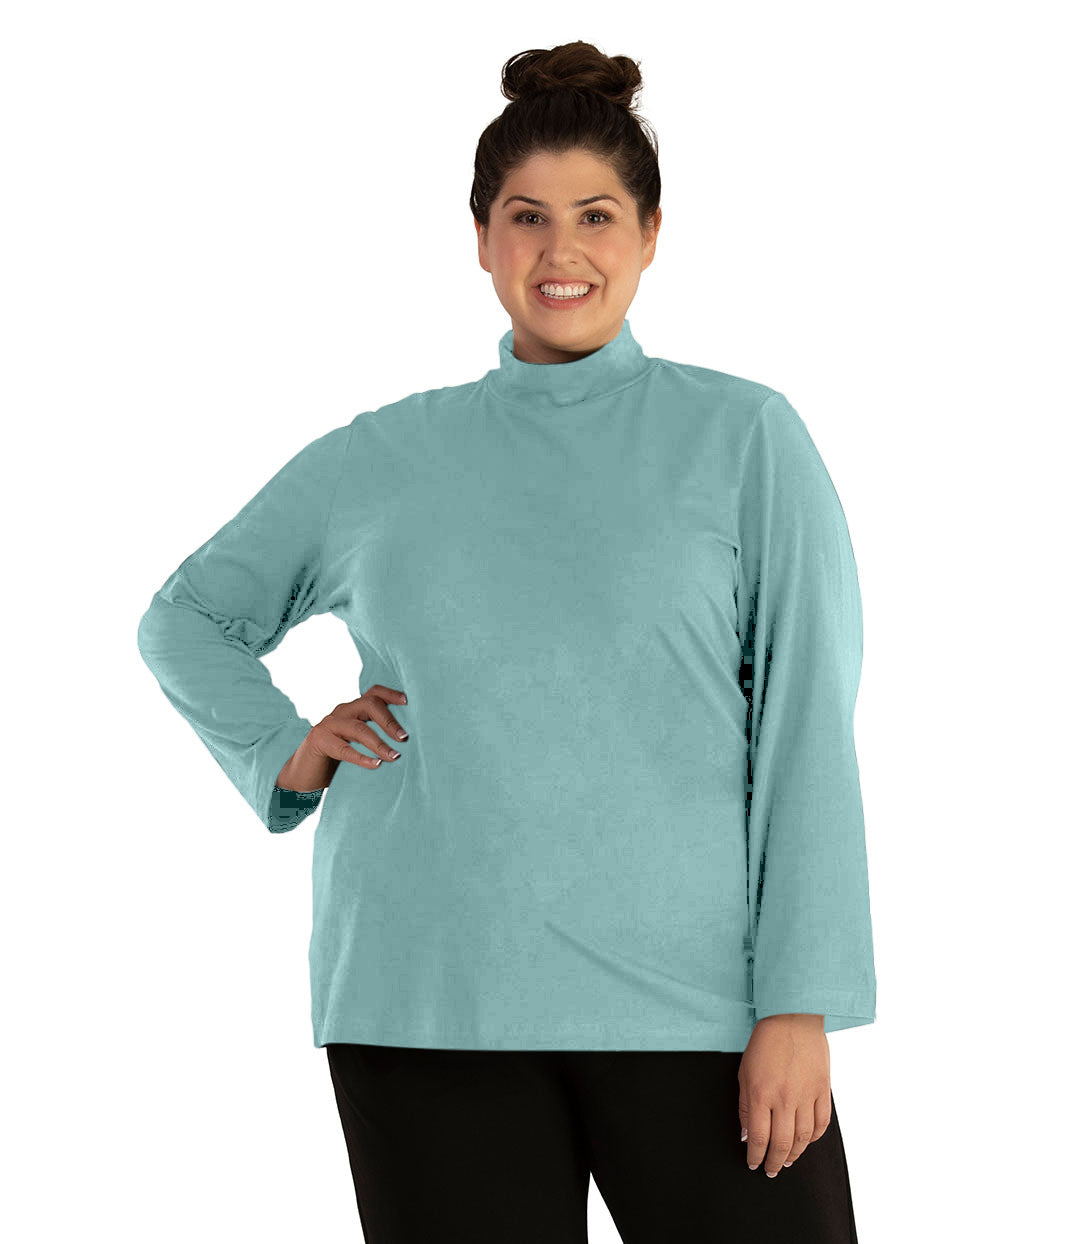 Plus size woman, facing front, wearing JunoActive plus size Stretch Naturals Lite Mock Neck Top in the color Robin Blue. She is wearing JunoActive Plus Size Leggings in the color Black.